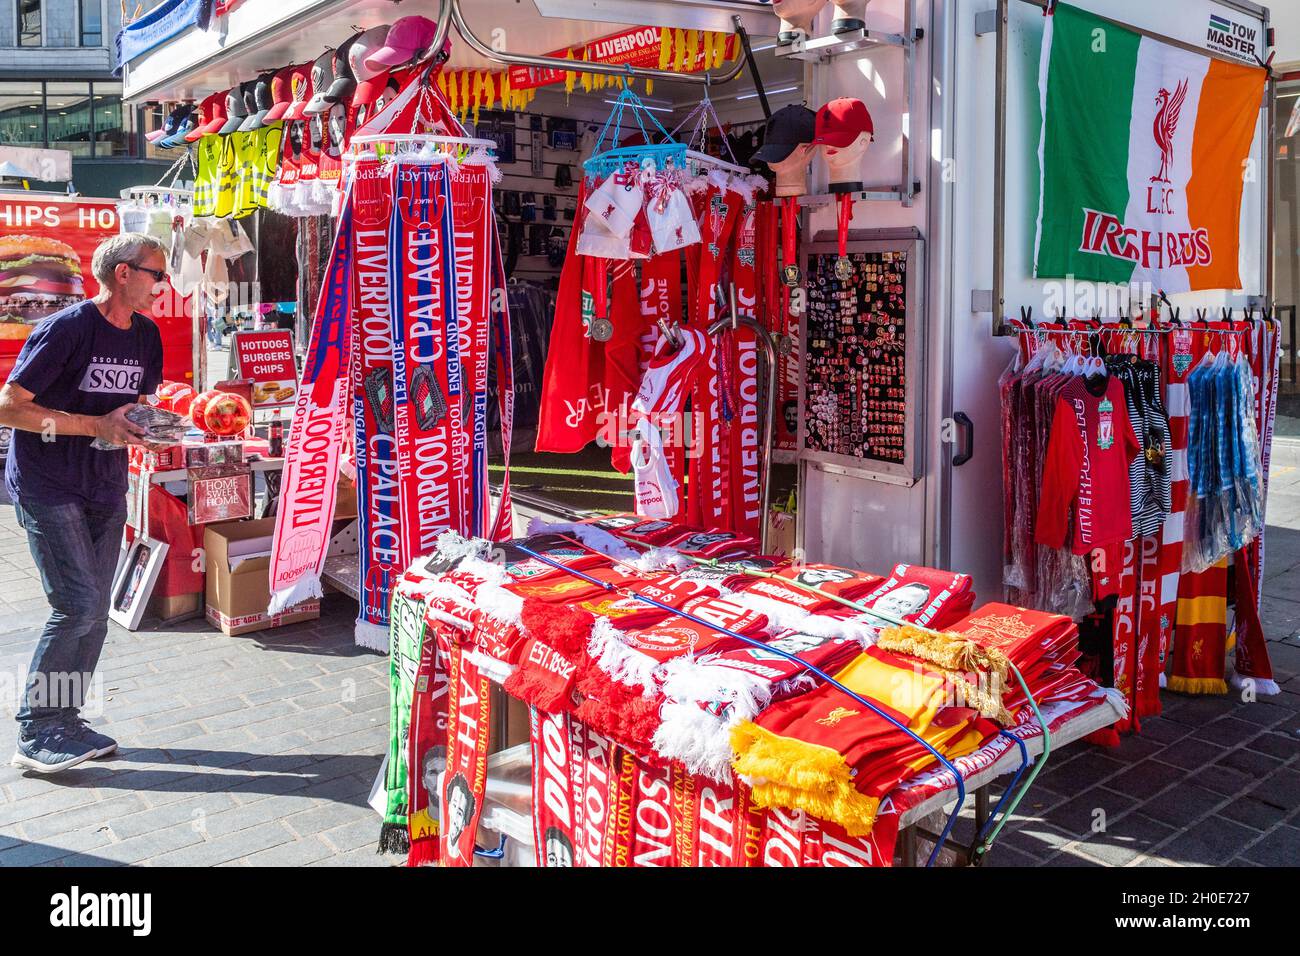 Liverpool FC merchandise stall in Liverpool city centre, Merseyside, UK. Stock Photo